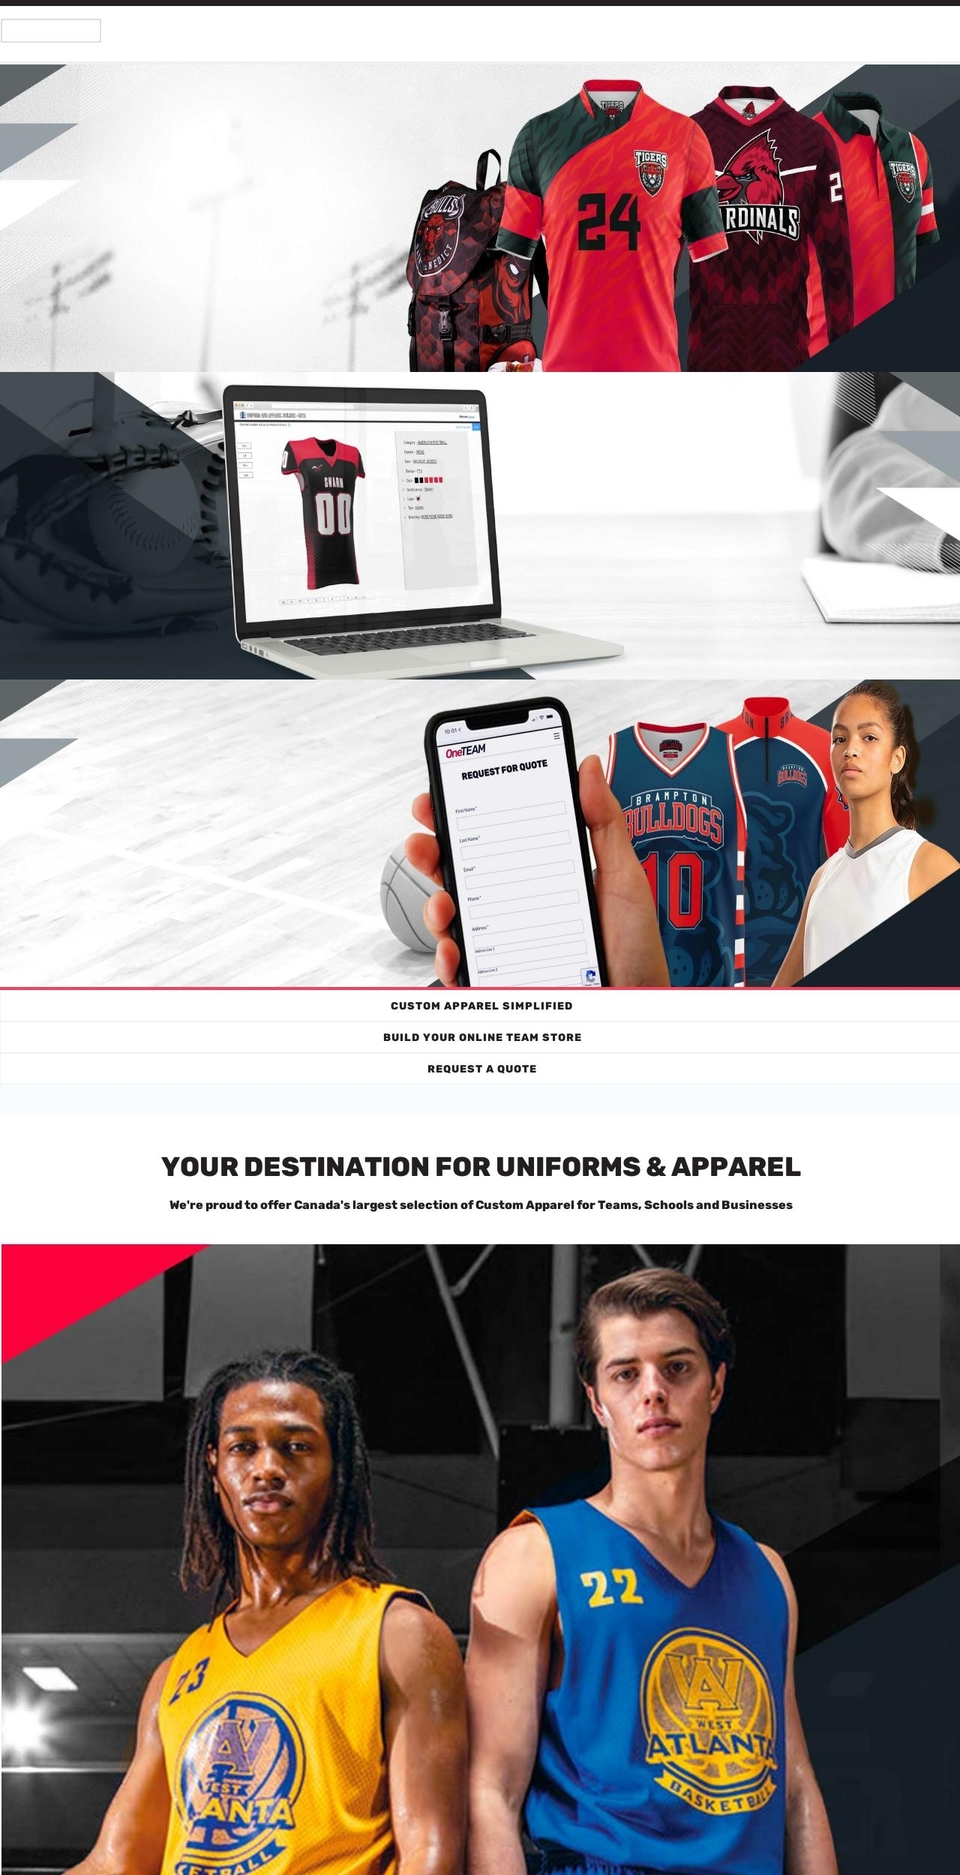 Sports Shopify theme site example oneteamsports.com